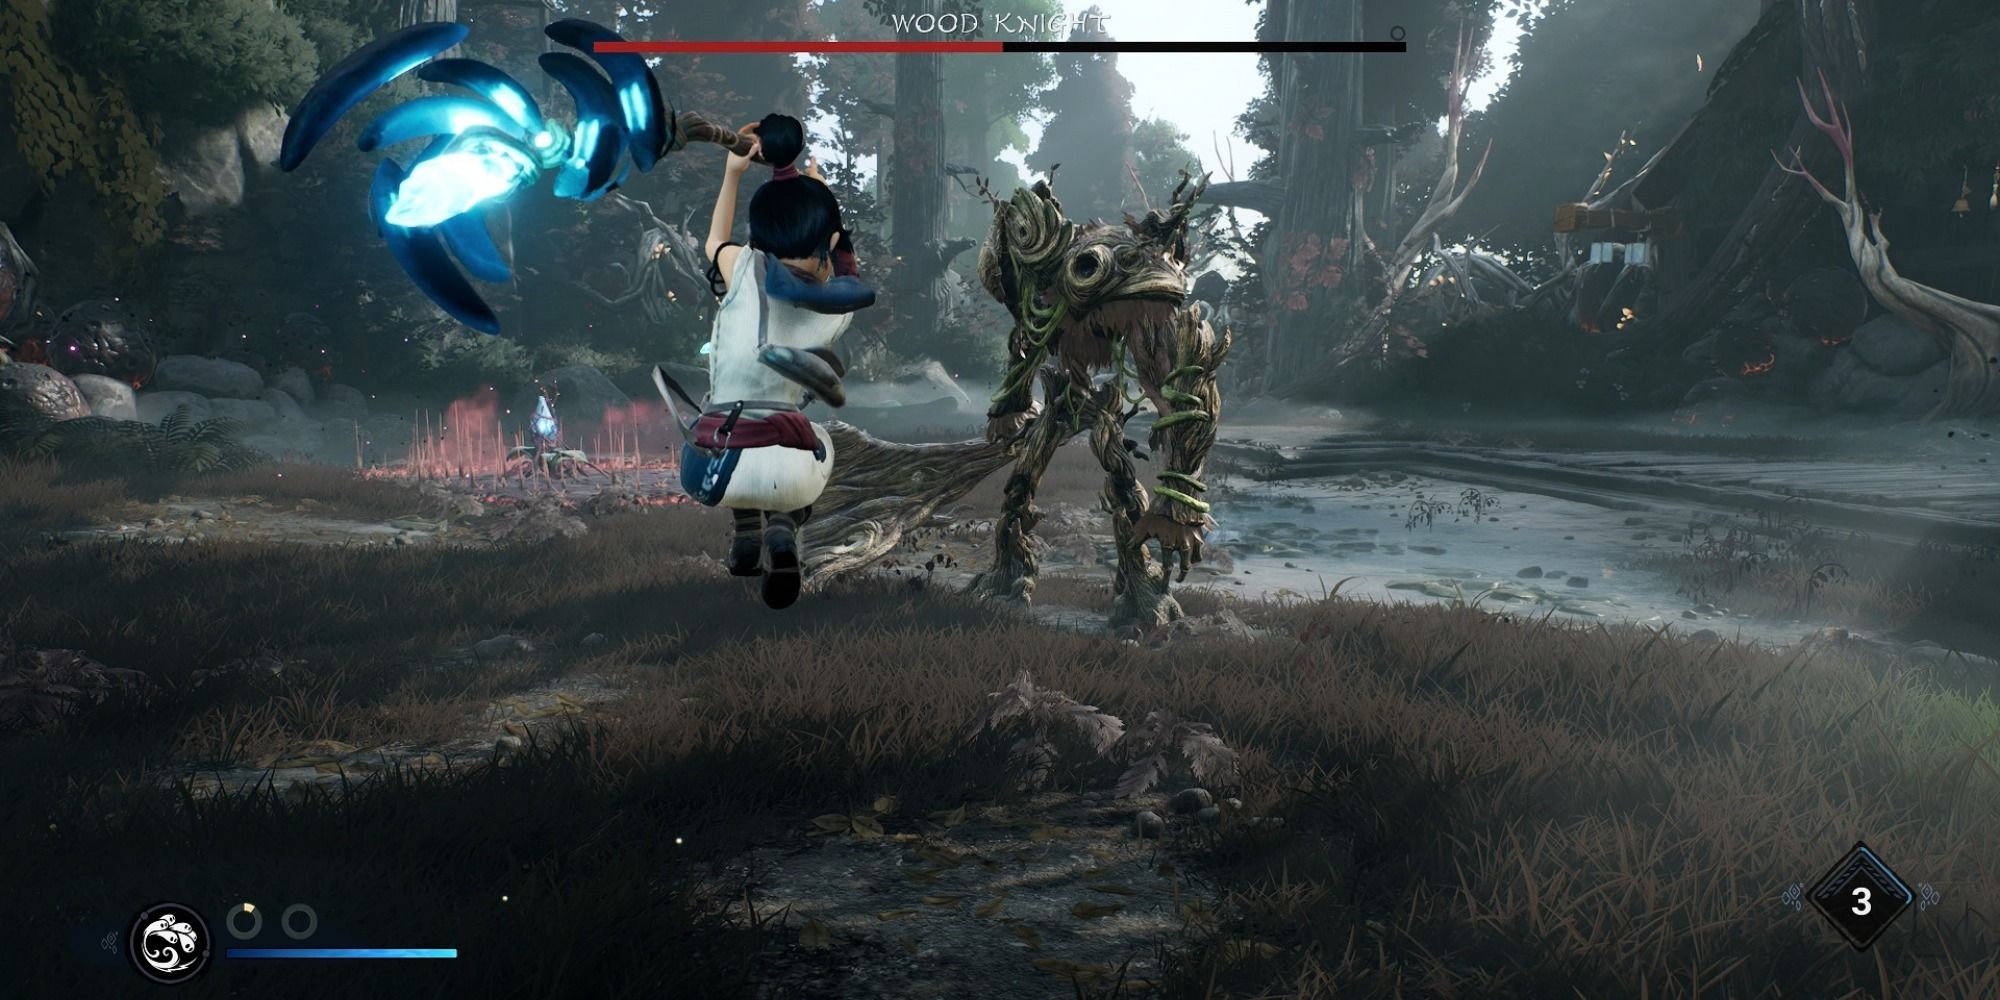 Kena in the air using Rot Hammer on a Wood Knight enemy